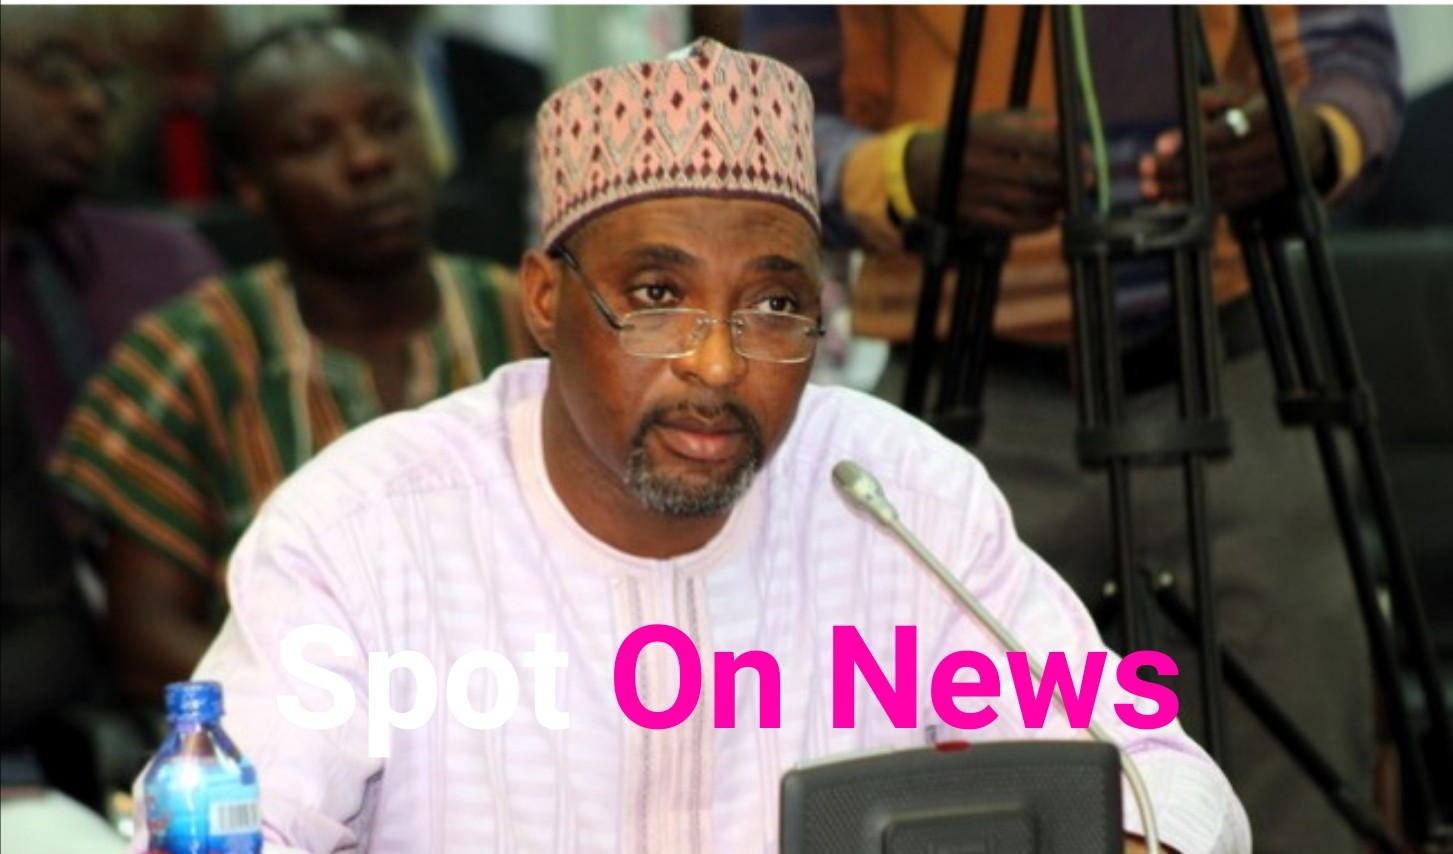 Alhaji Muntaka calls the 'House' untruthful for concealing 15 COVID-19 cases in Parliament from Ghanaians